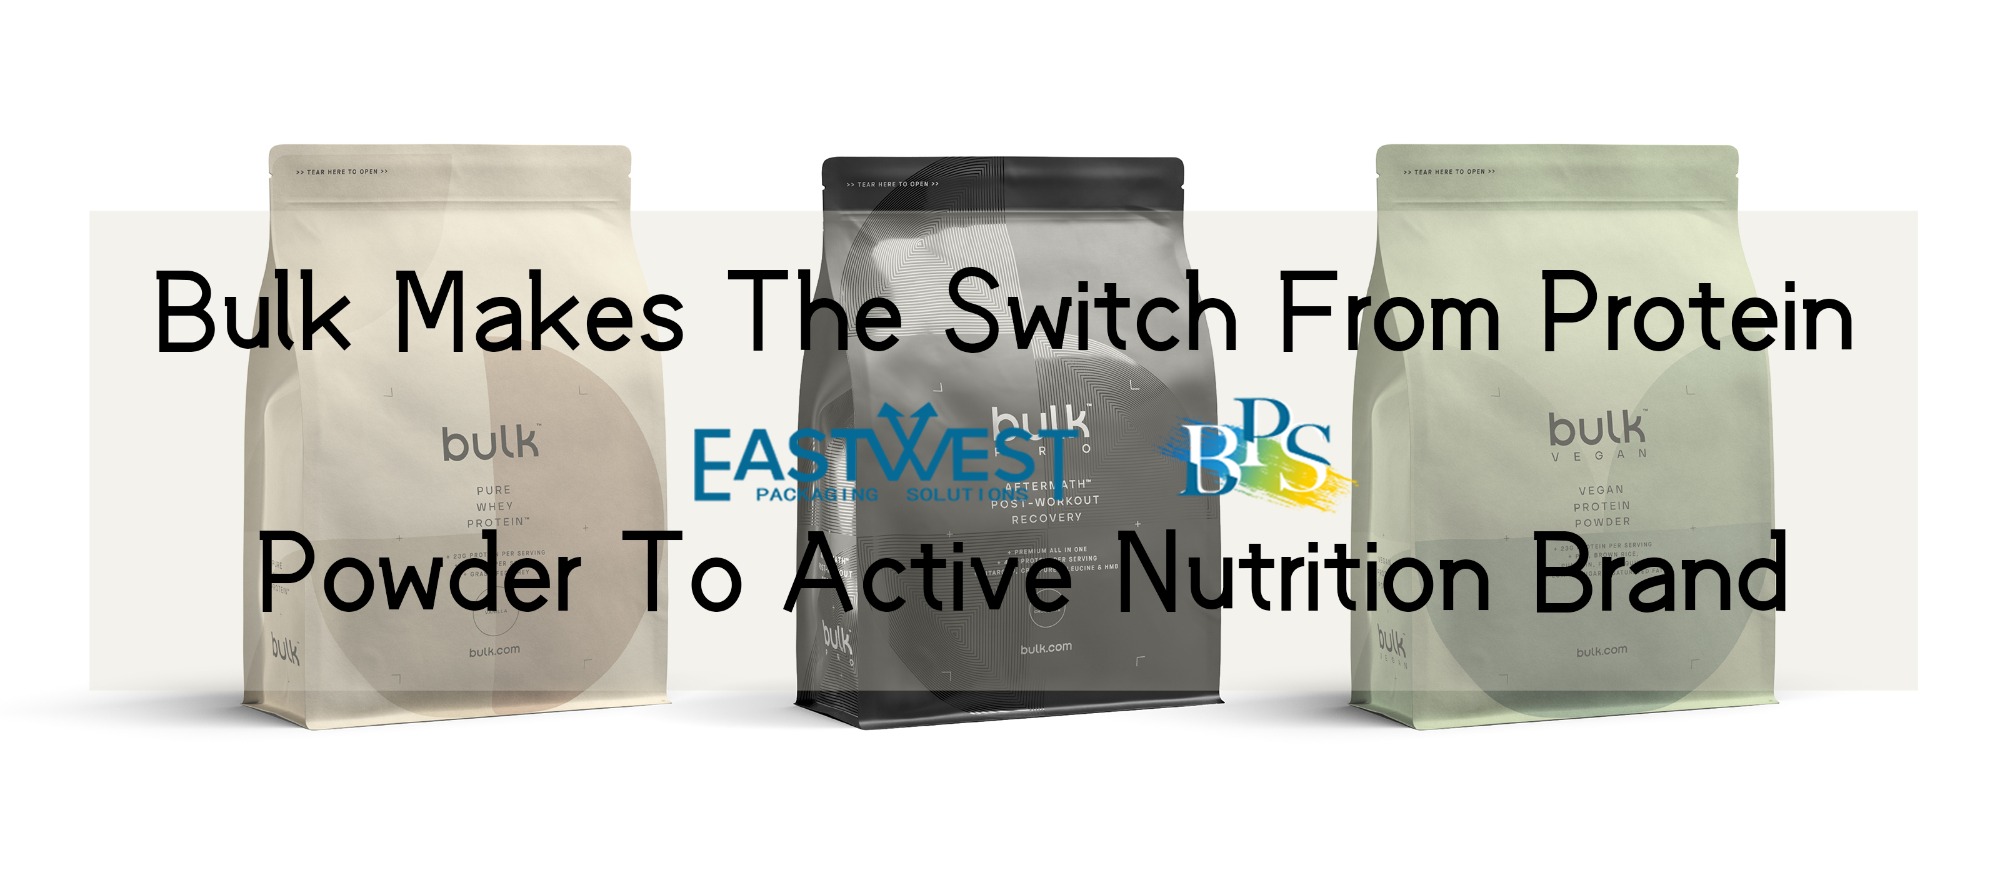 Bulk Makes The Switch From Protein Powder To Active Nutrition Brand